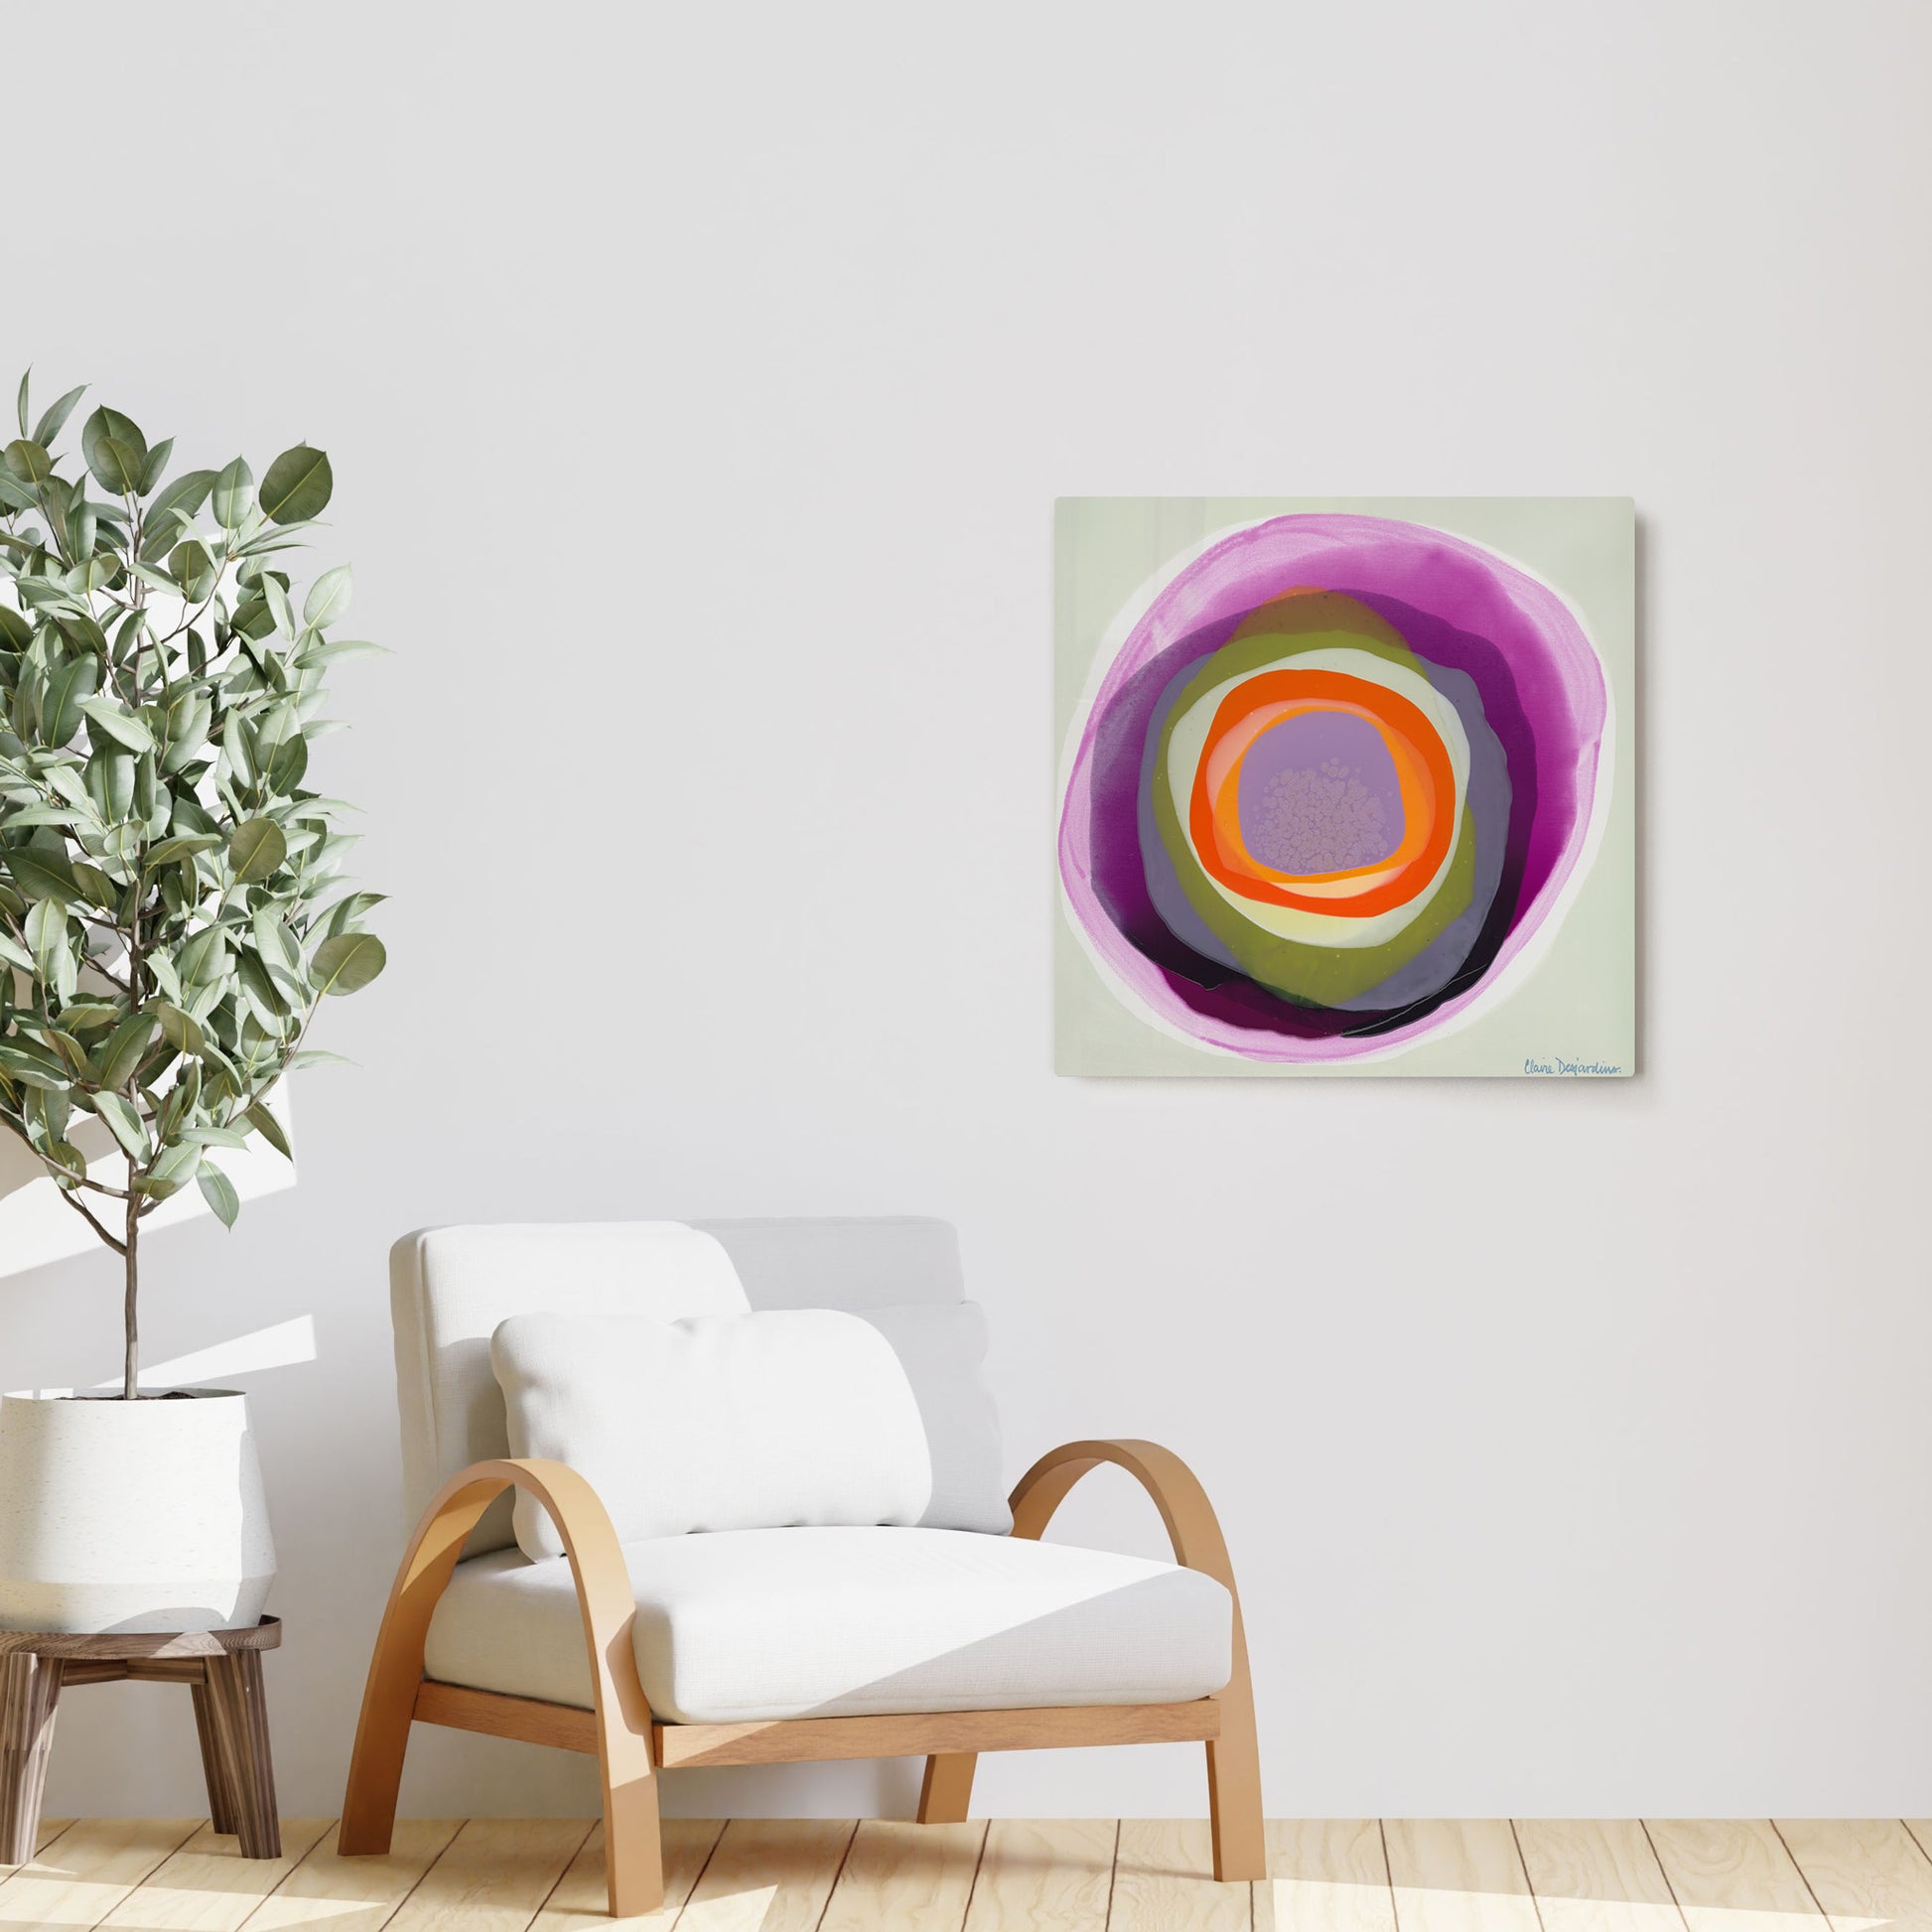 Claire Desjardins' Serene painting reproduced on HD metal print and displayed on wall